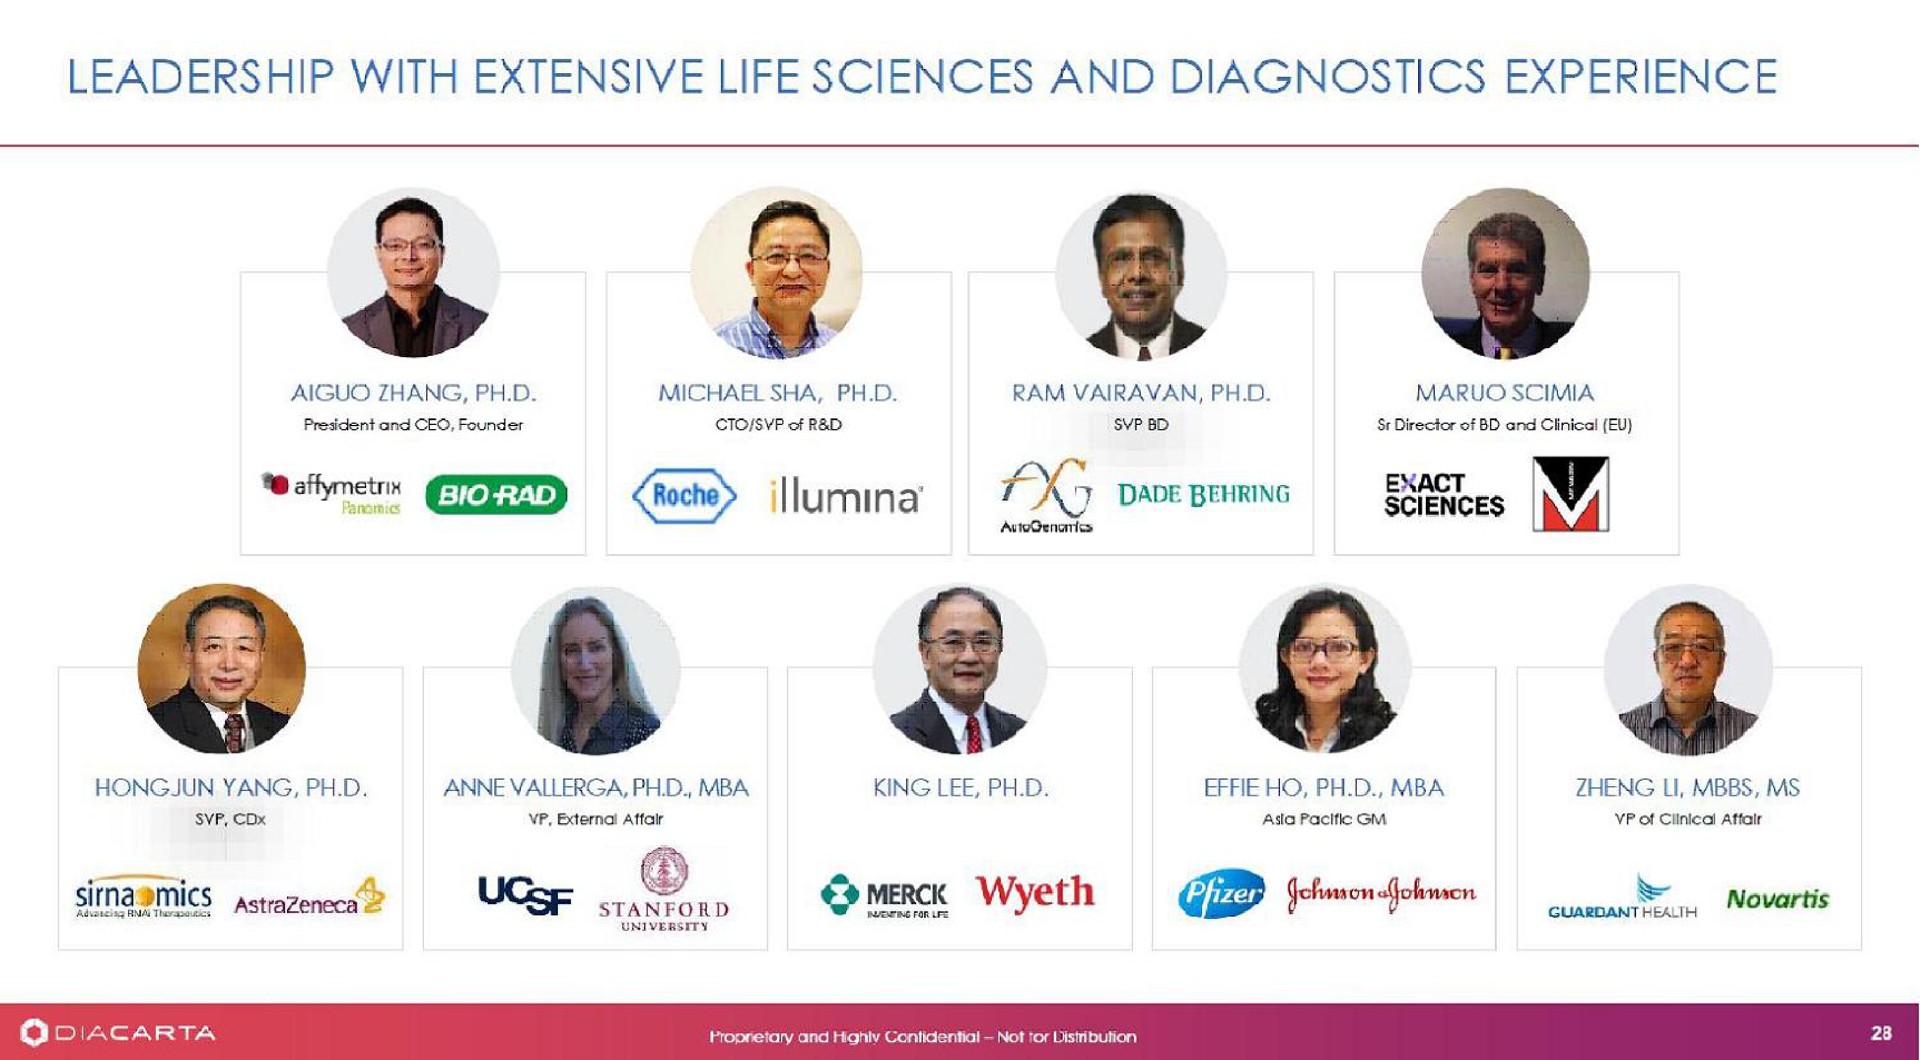 leadership with extensive life sciences and diagnostics experience | DiaCarta